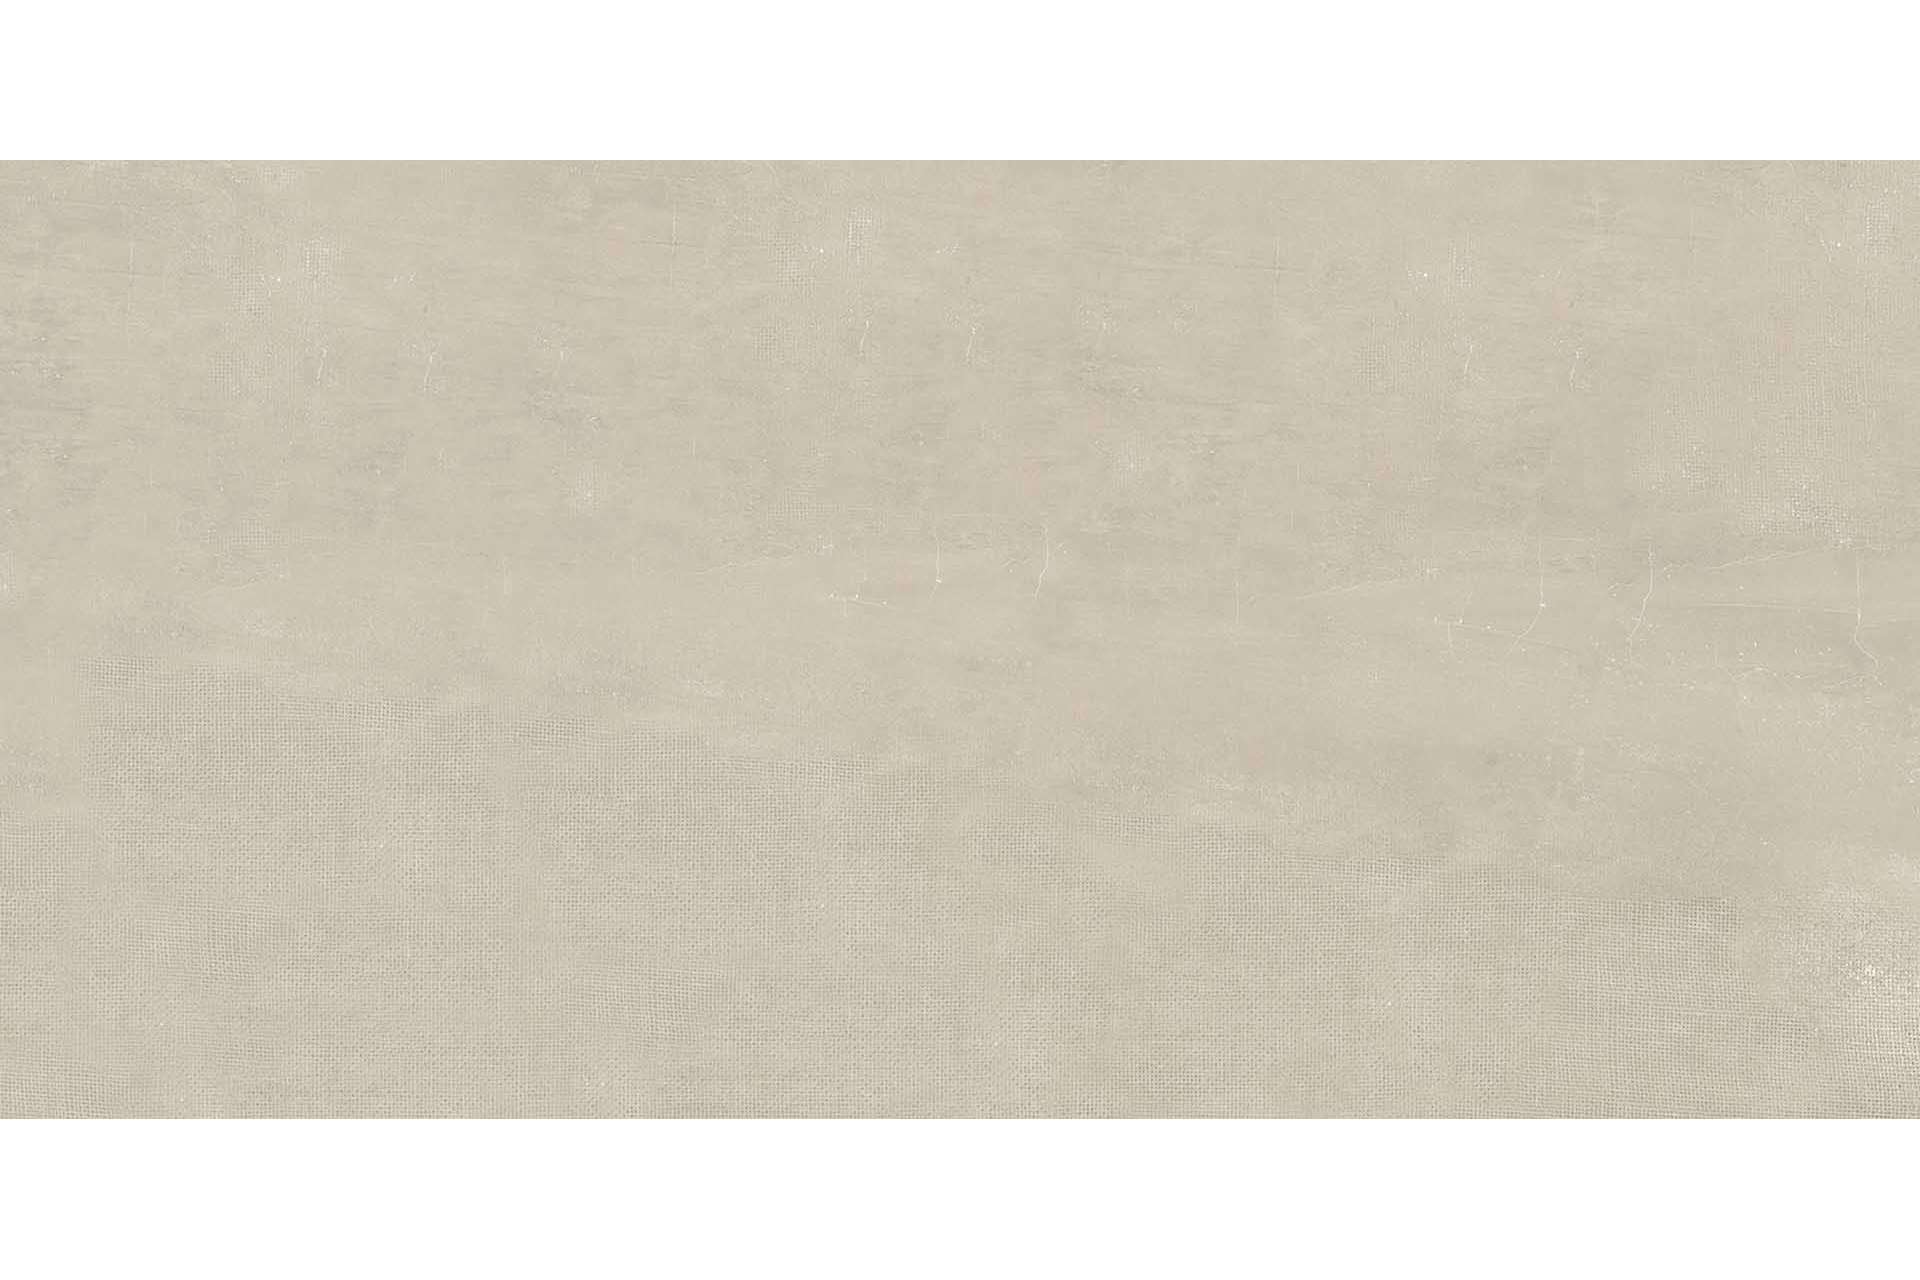 Керамогранит Provenza by Emil Group Gesso Taupe Linen Gesso